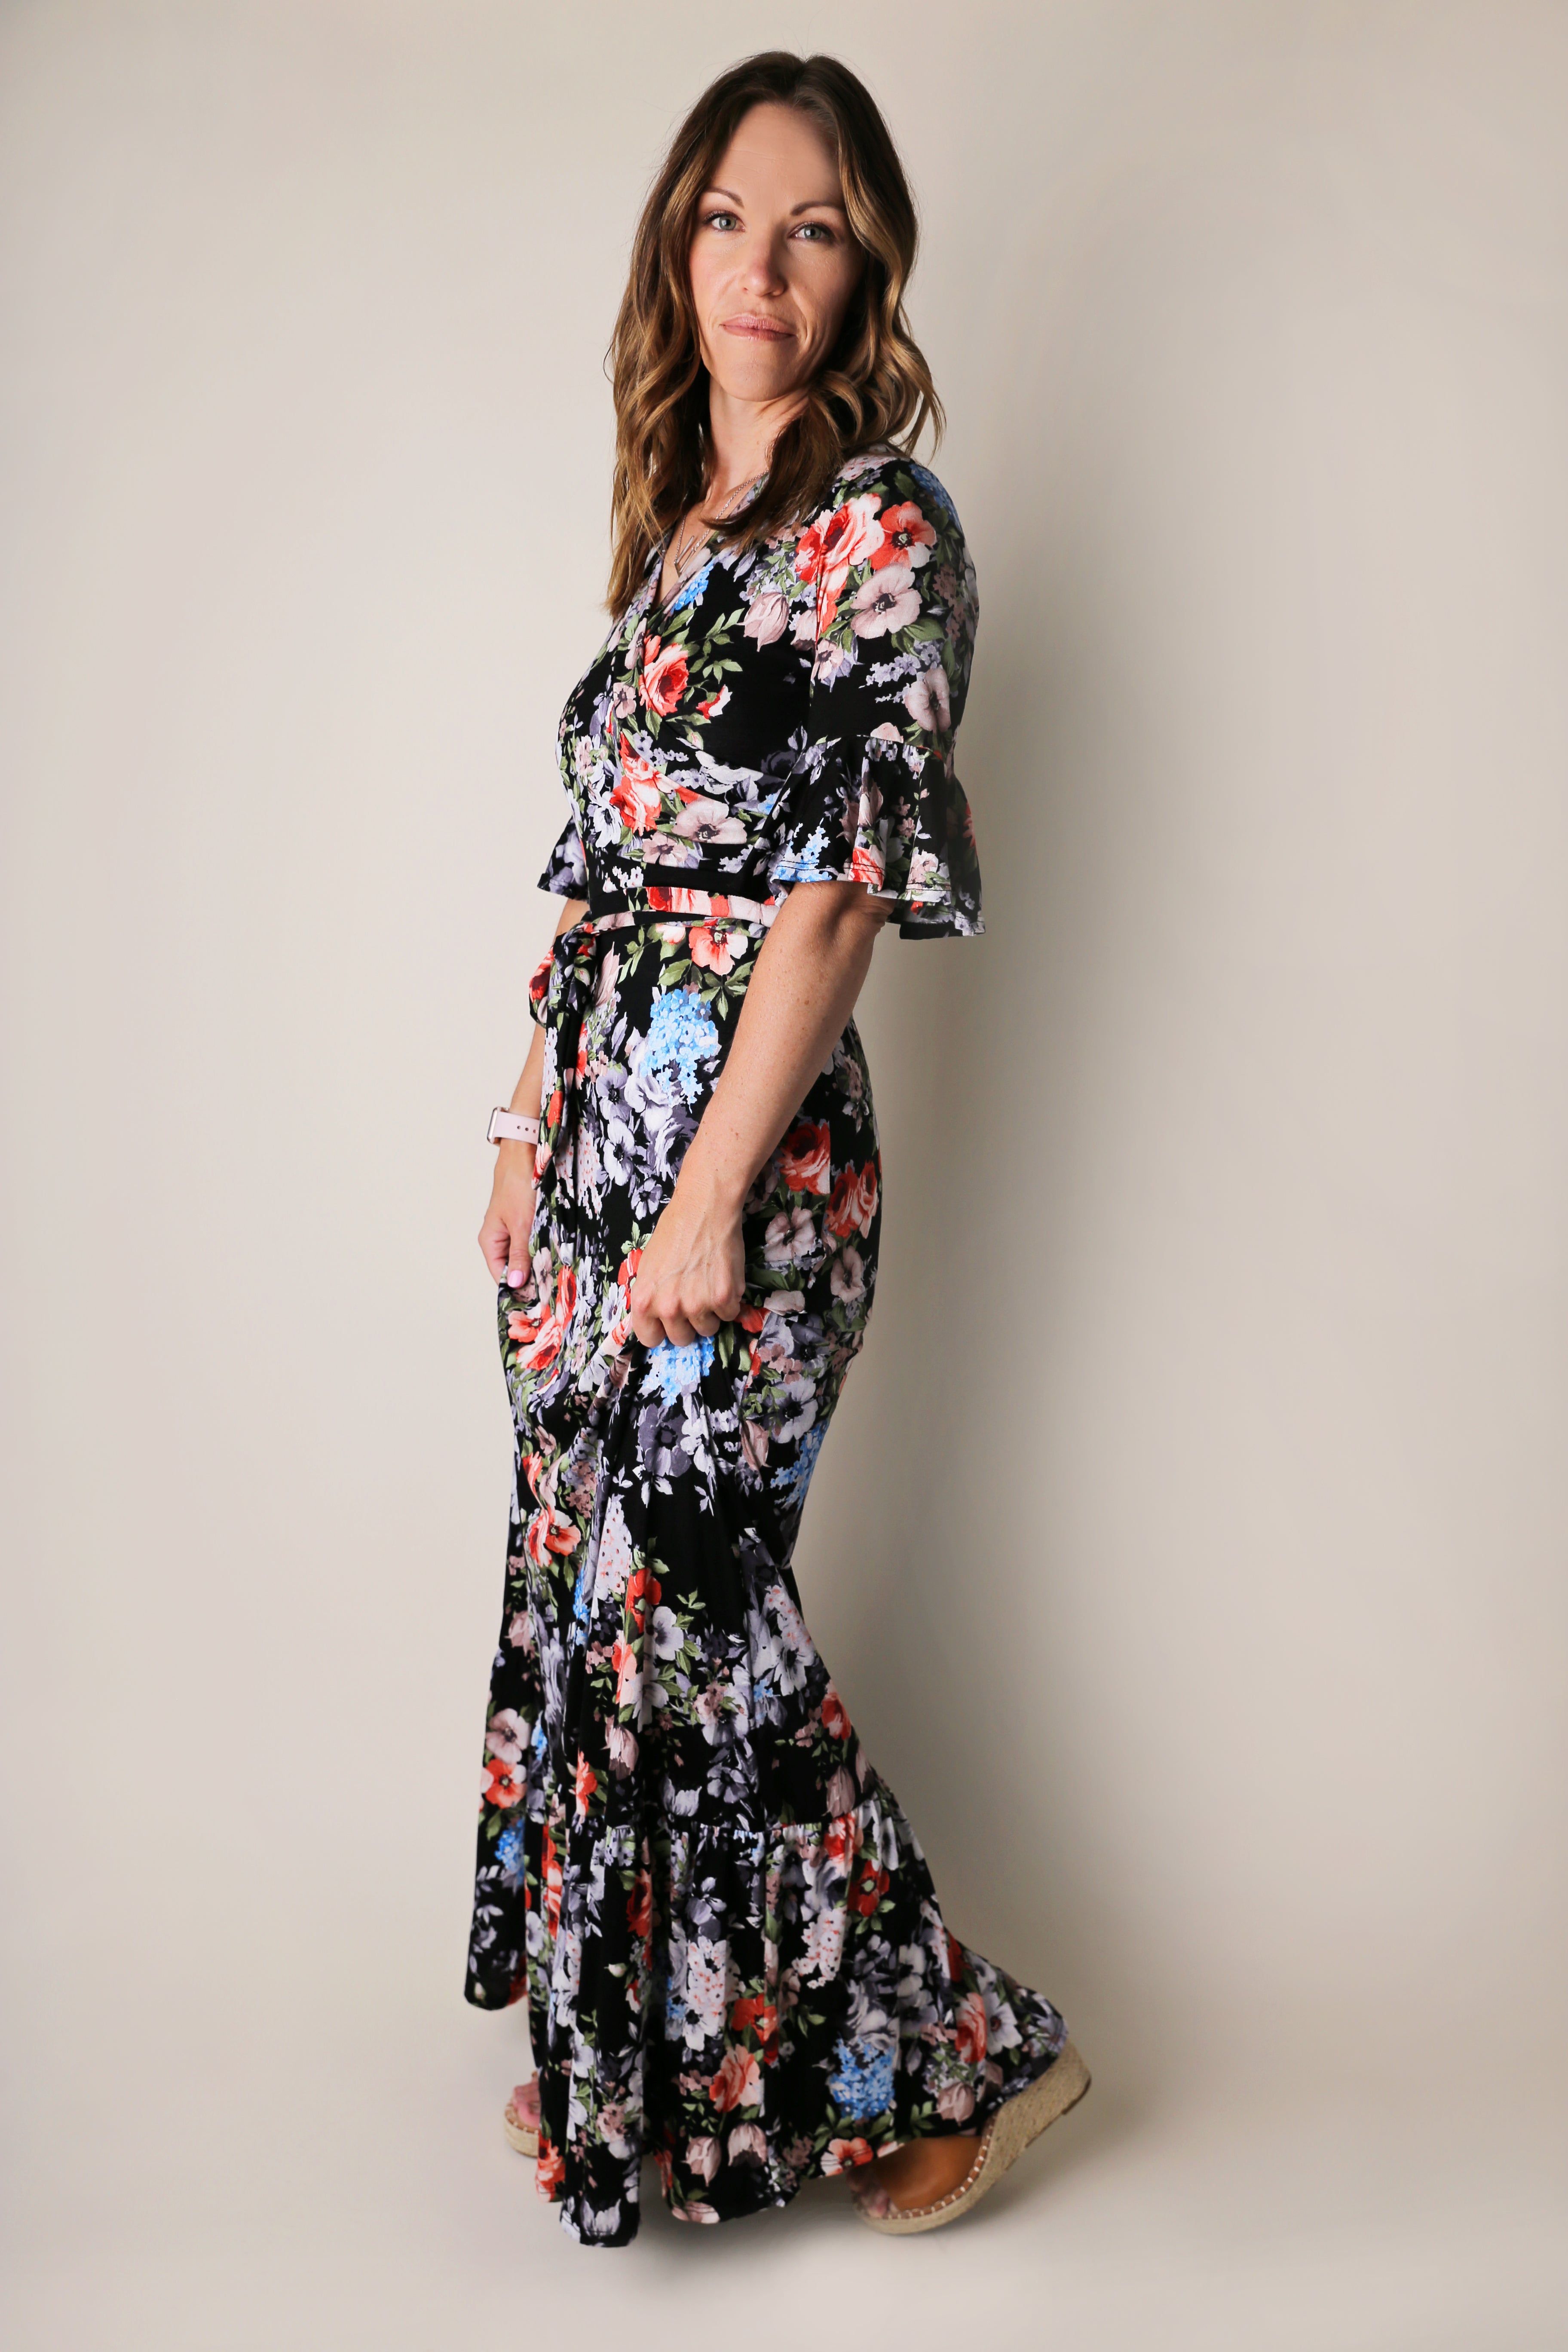 Floral Maxi Dress with Bell Sleeve - 2 Colors